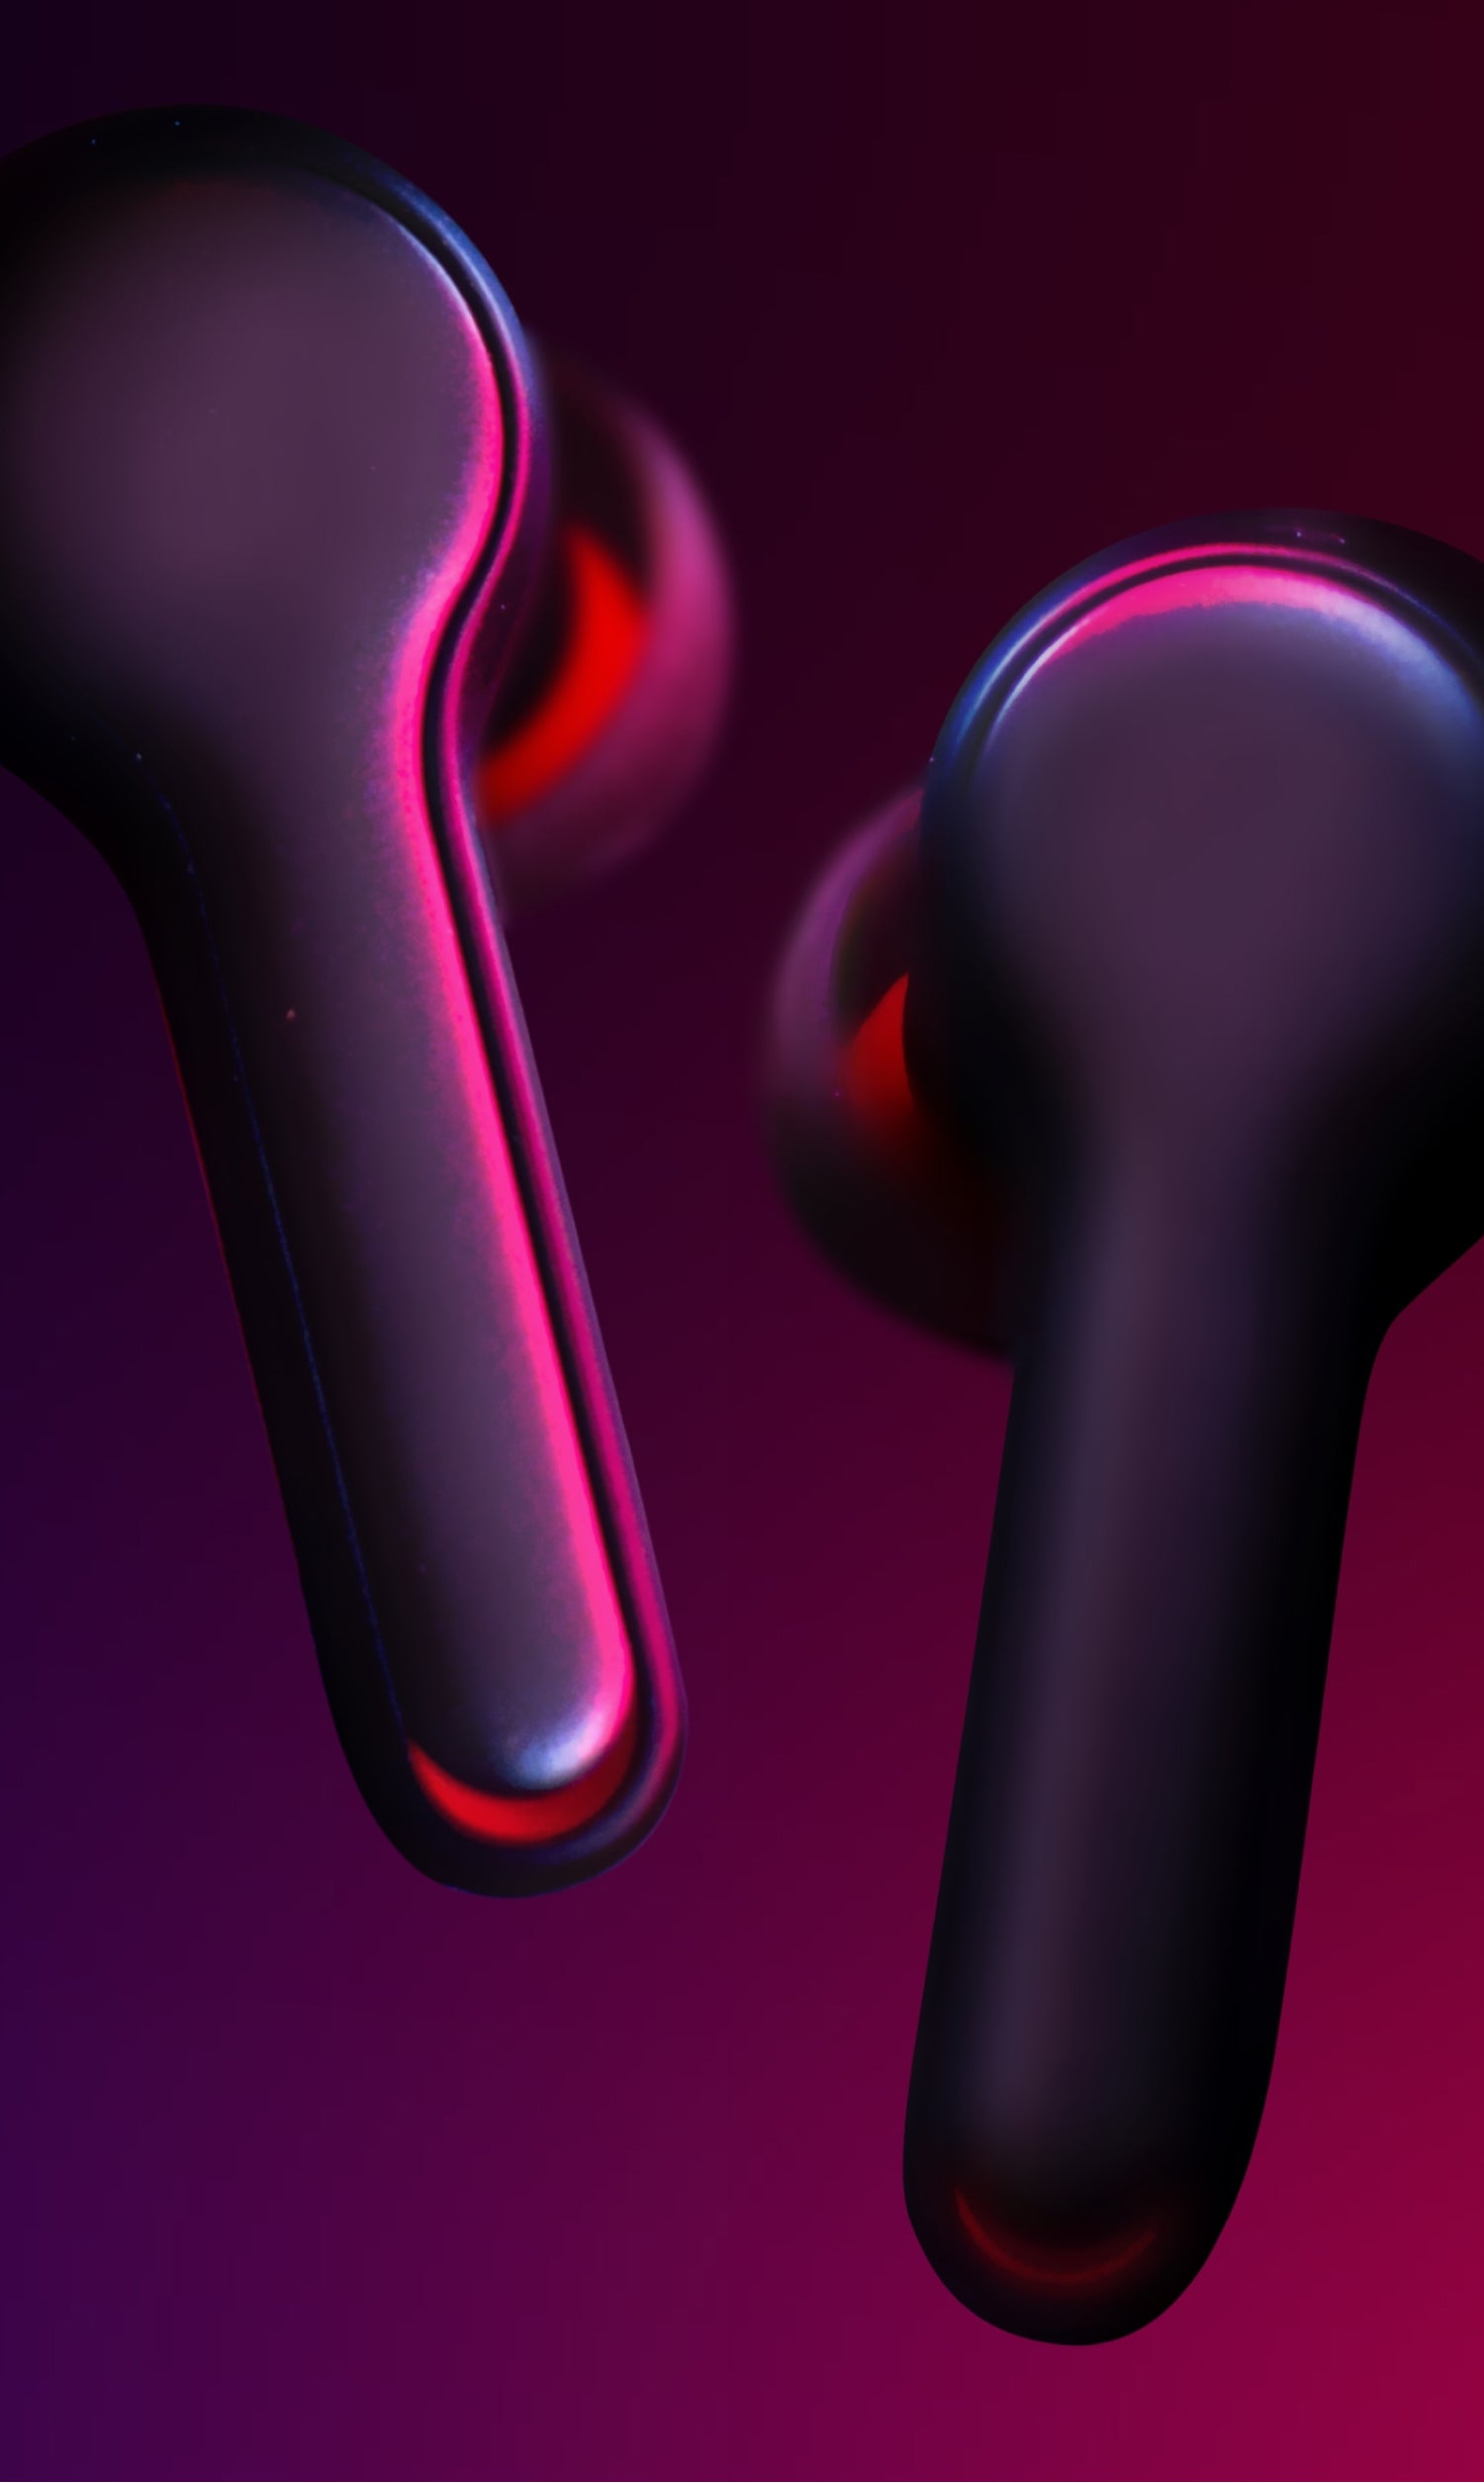 Earbuds on a pink and purple lighting